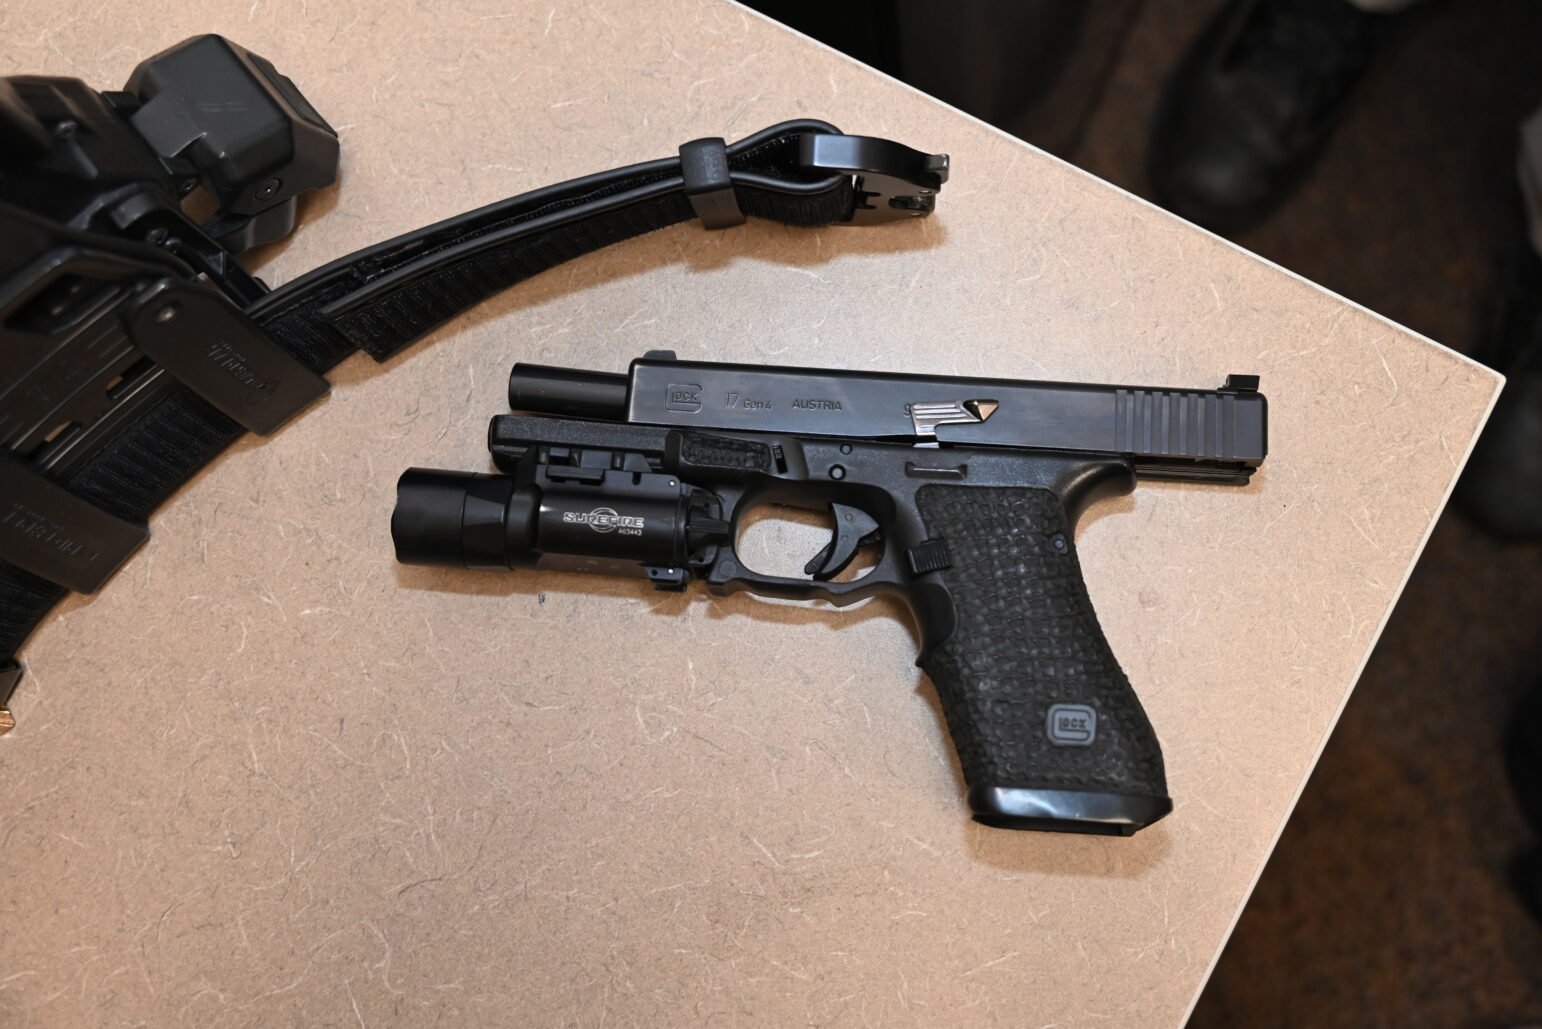 A semi-automatic pistol with a tactical flashlight attached lies on a flat surface alongside a duty belt equipped with various police equipment. The gun and belt are being displayed for documentation or examination, with the pistol's magazine removed and placed next to it.